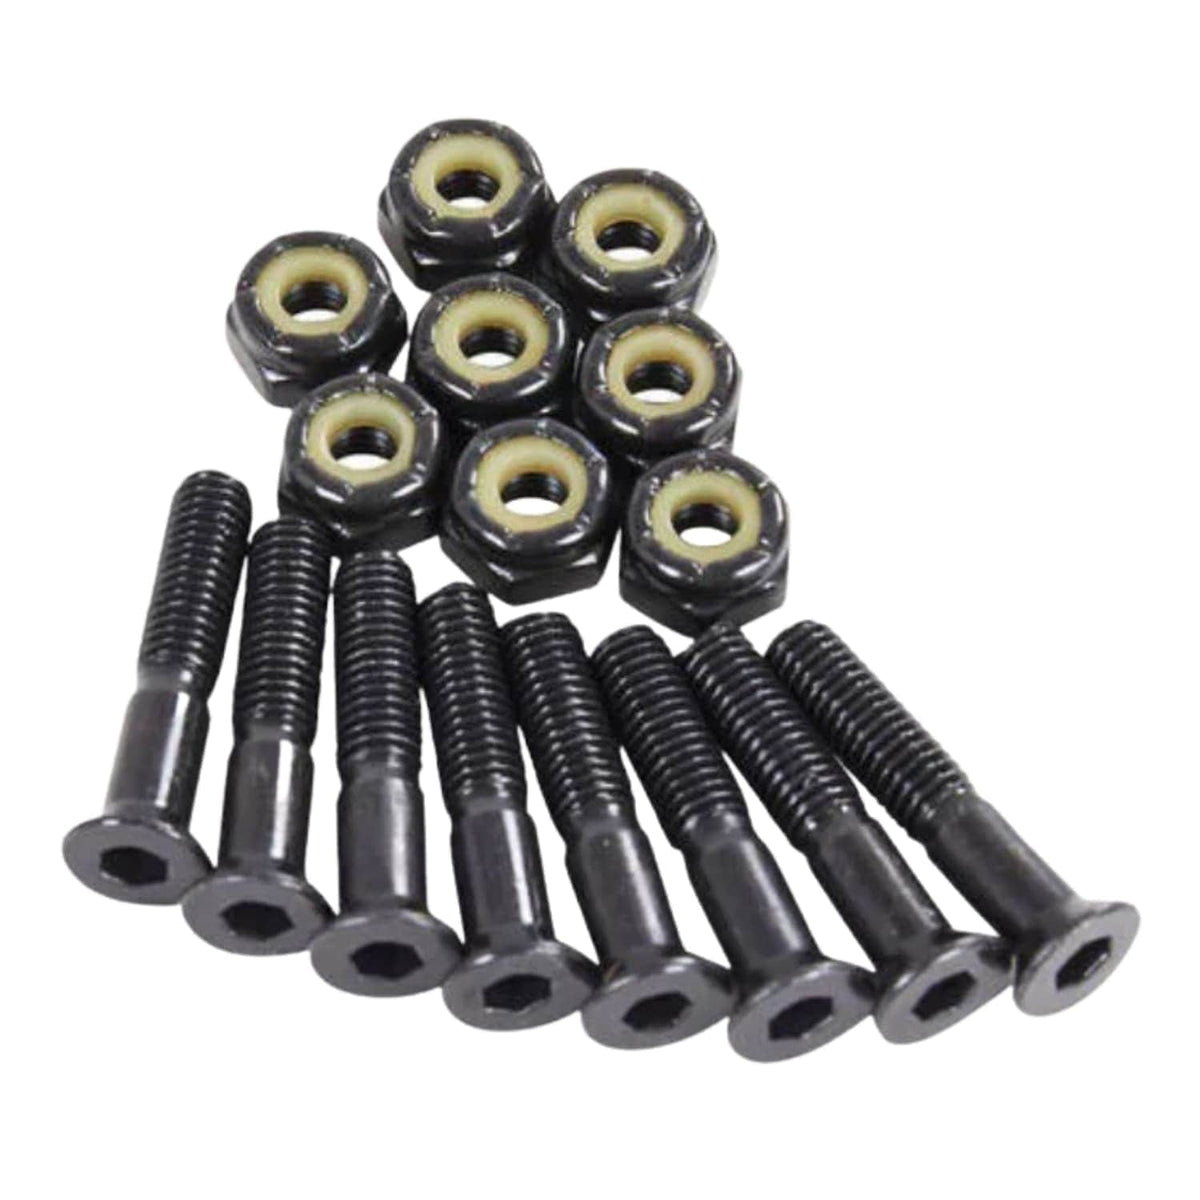 Sushi Loose Truck Bolts Set of 8 - Black - 1in - Skateboard Truck Bolts by Sushi 1 inch